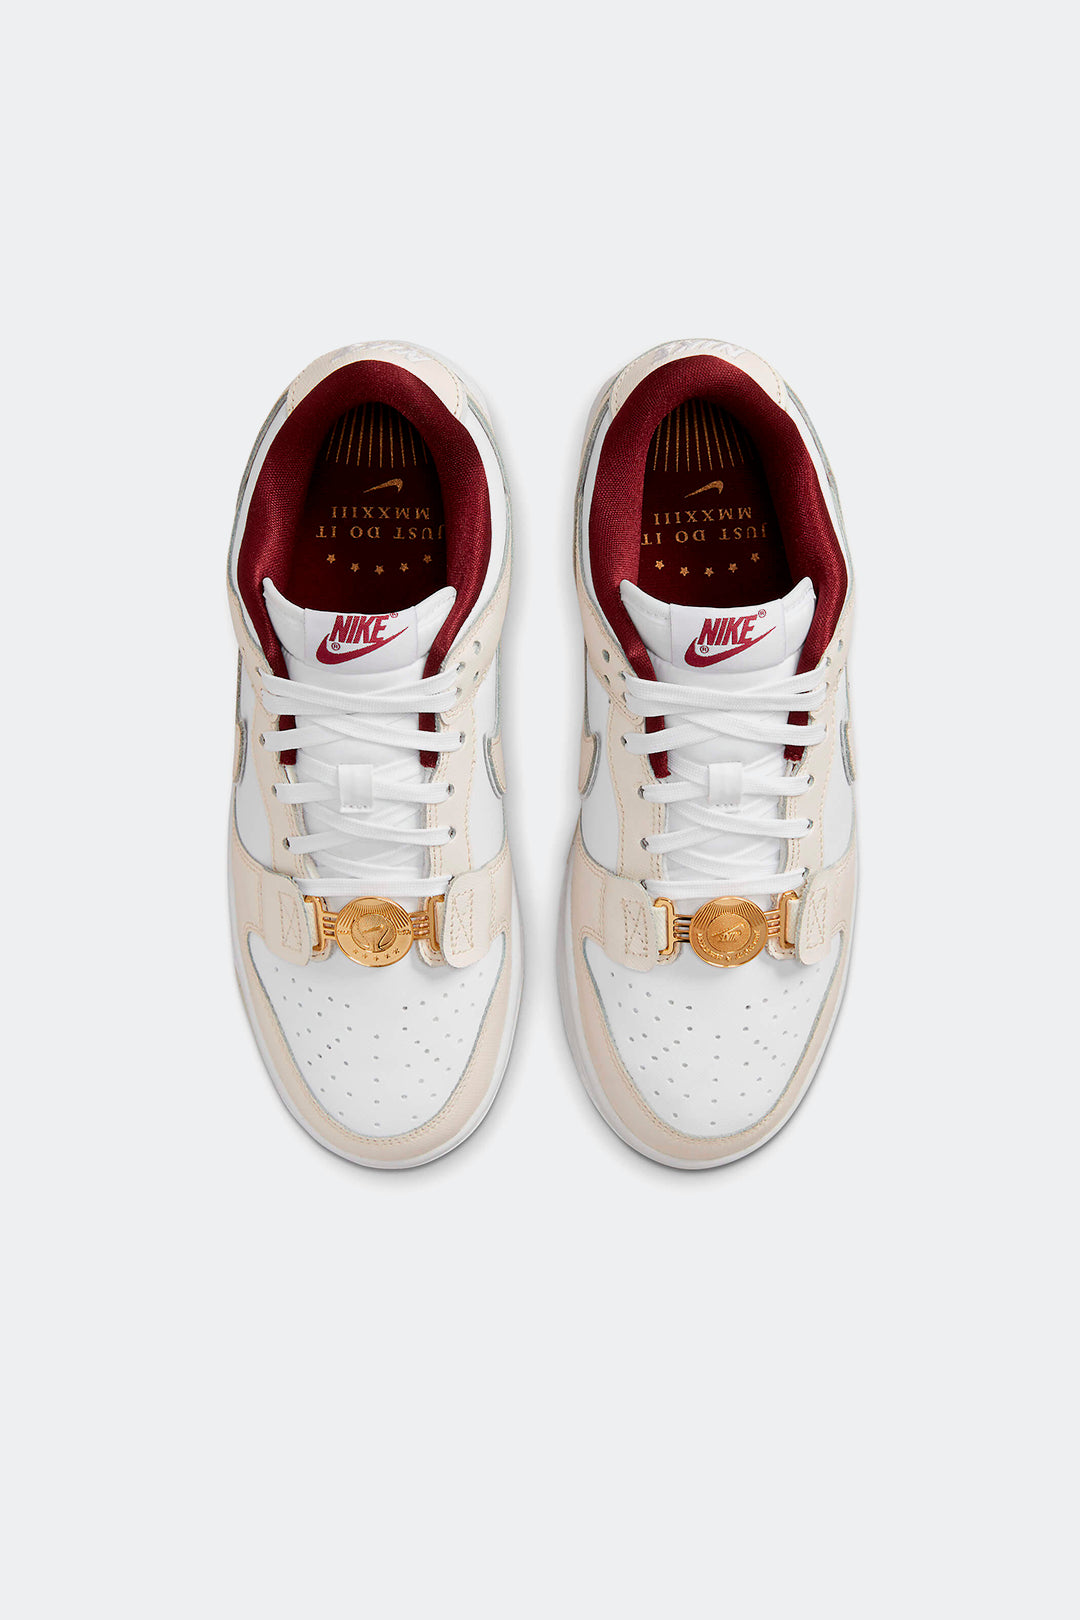 NIKE DUNK LOW "JUST DO IT" - MUJER - HYPE